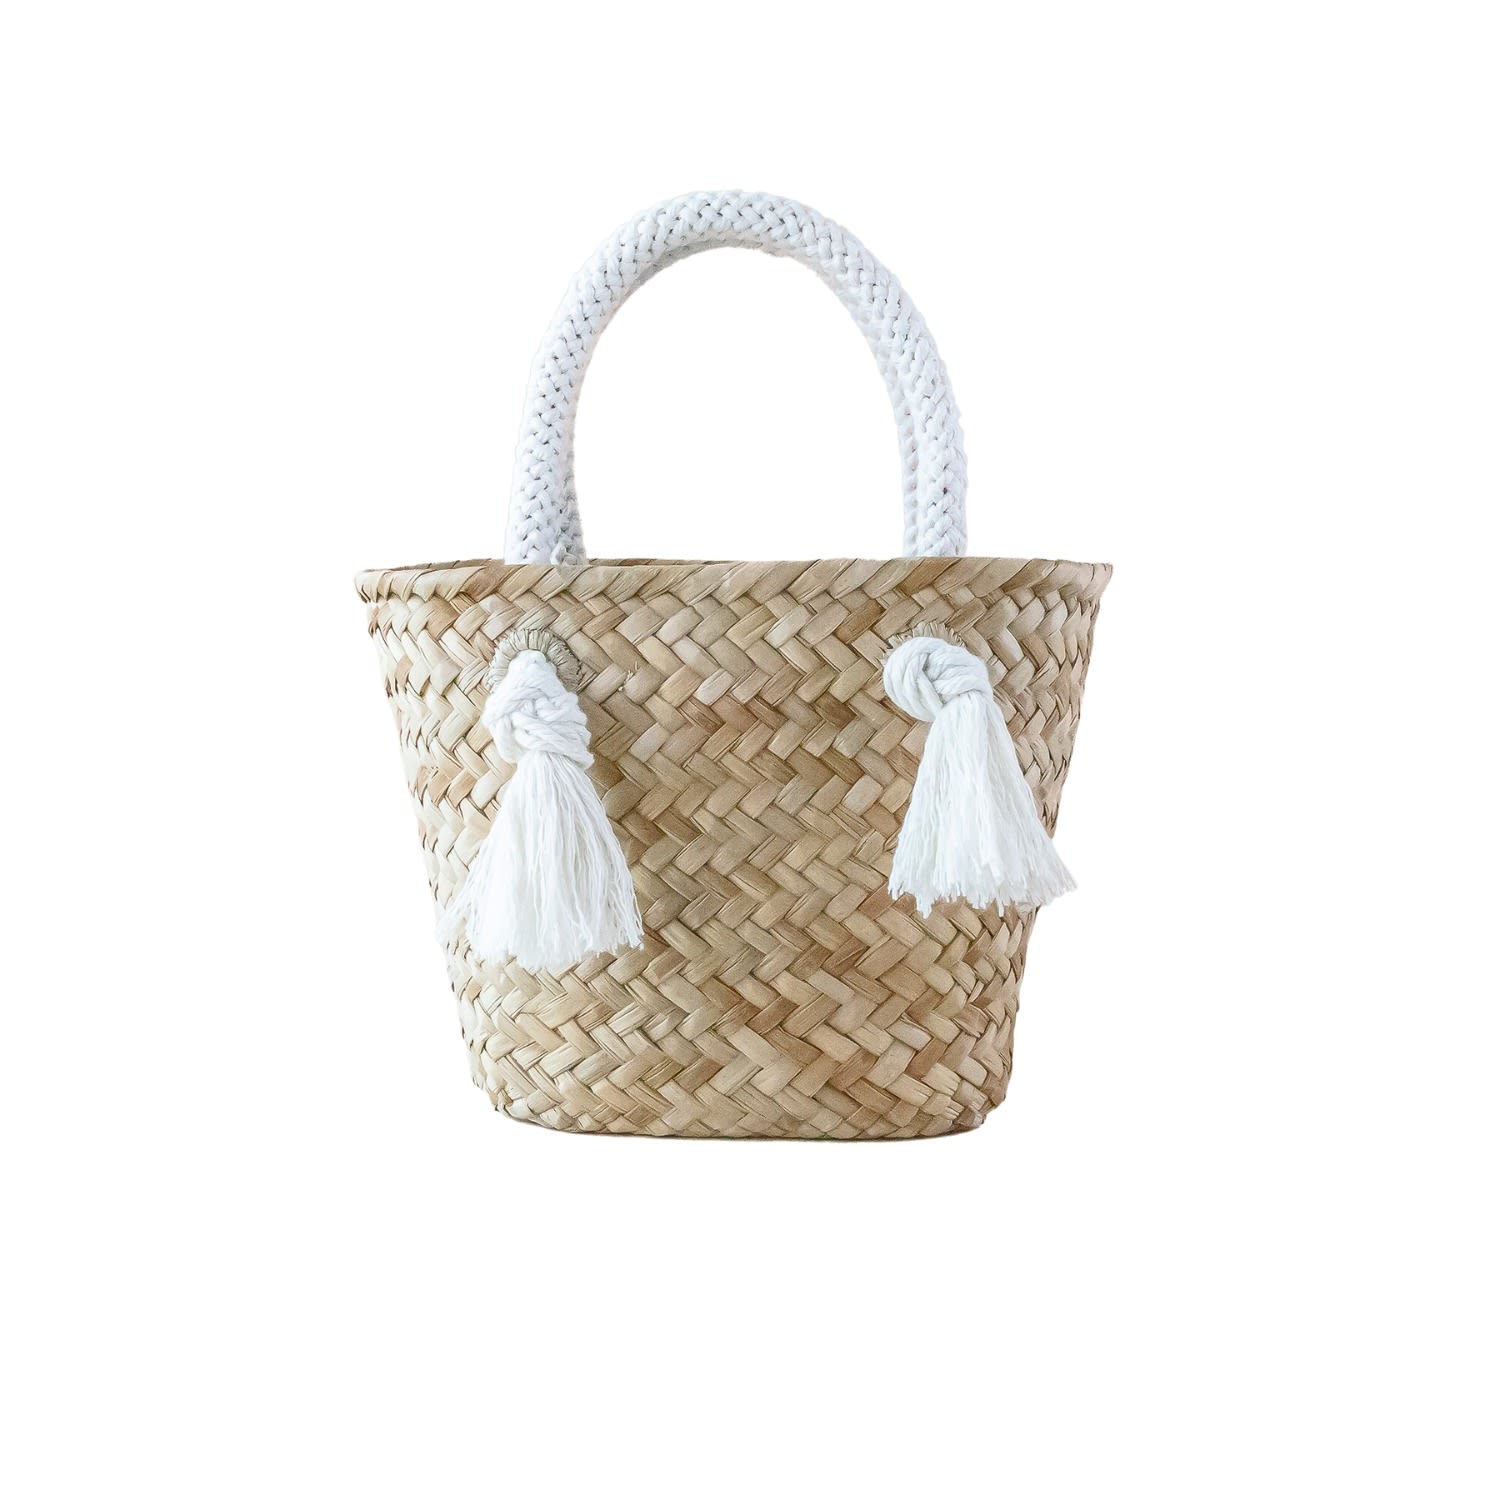 Likha Women's White Oat Small Classic Tote Bag With Braided Handles